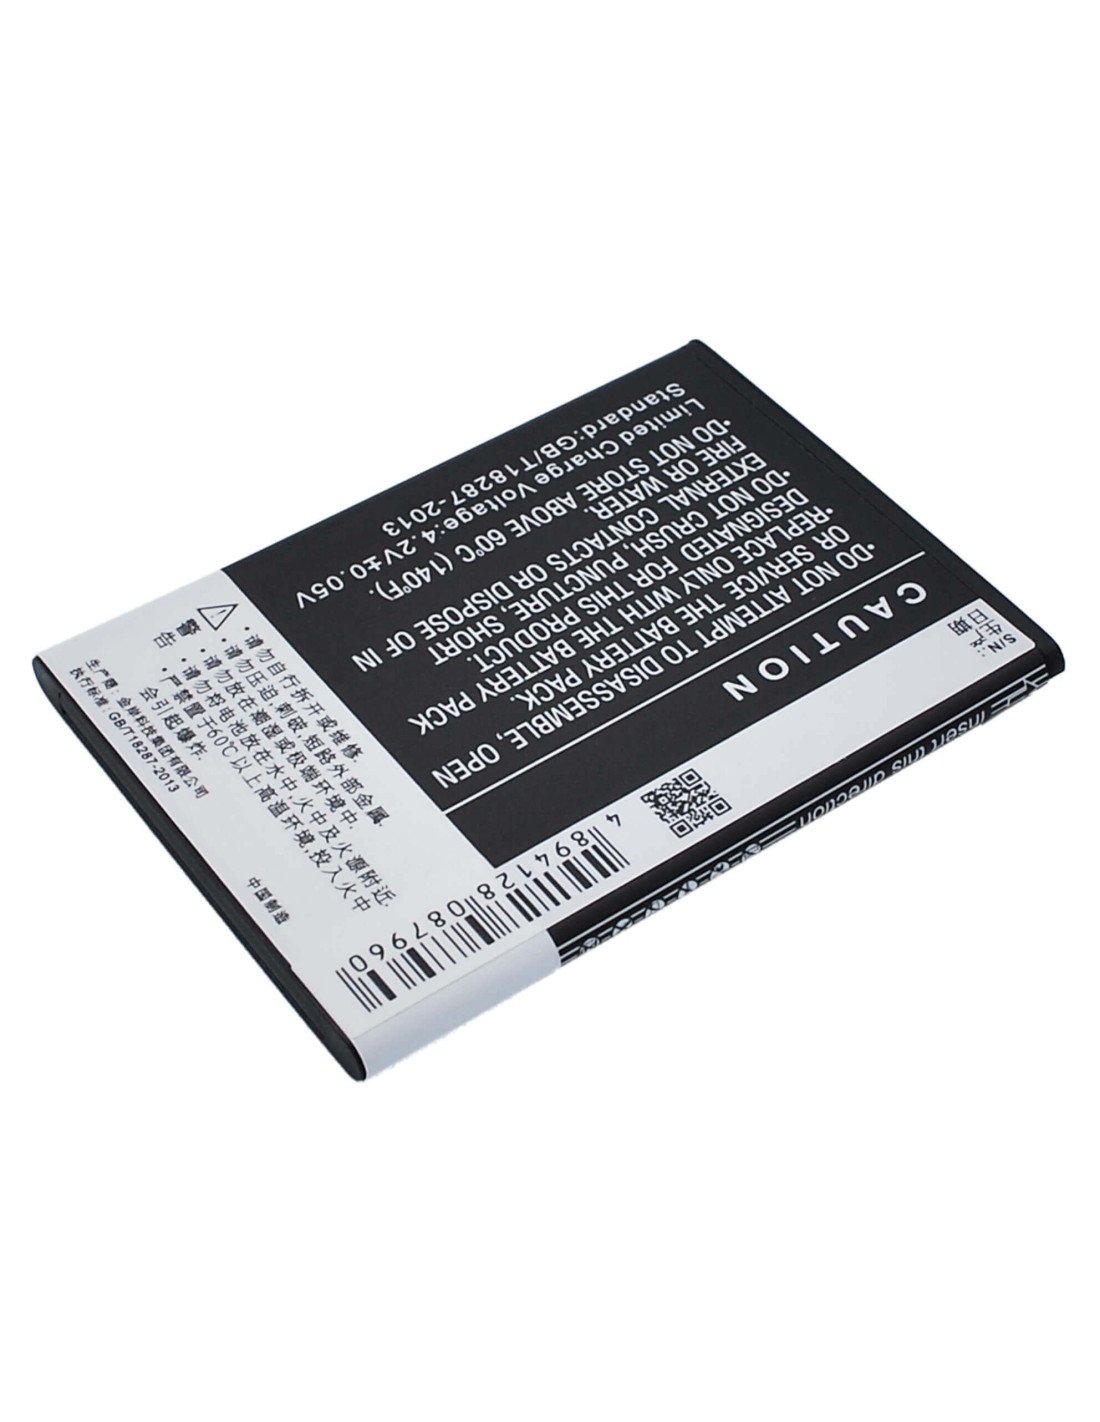 Battery for Coolpad 7011, 7020, 7019A 3.7V, 1300mAh - 4.81Wh